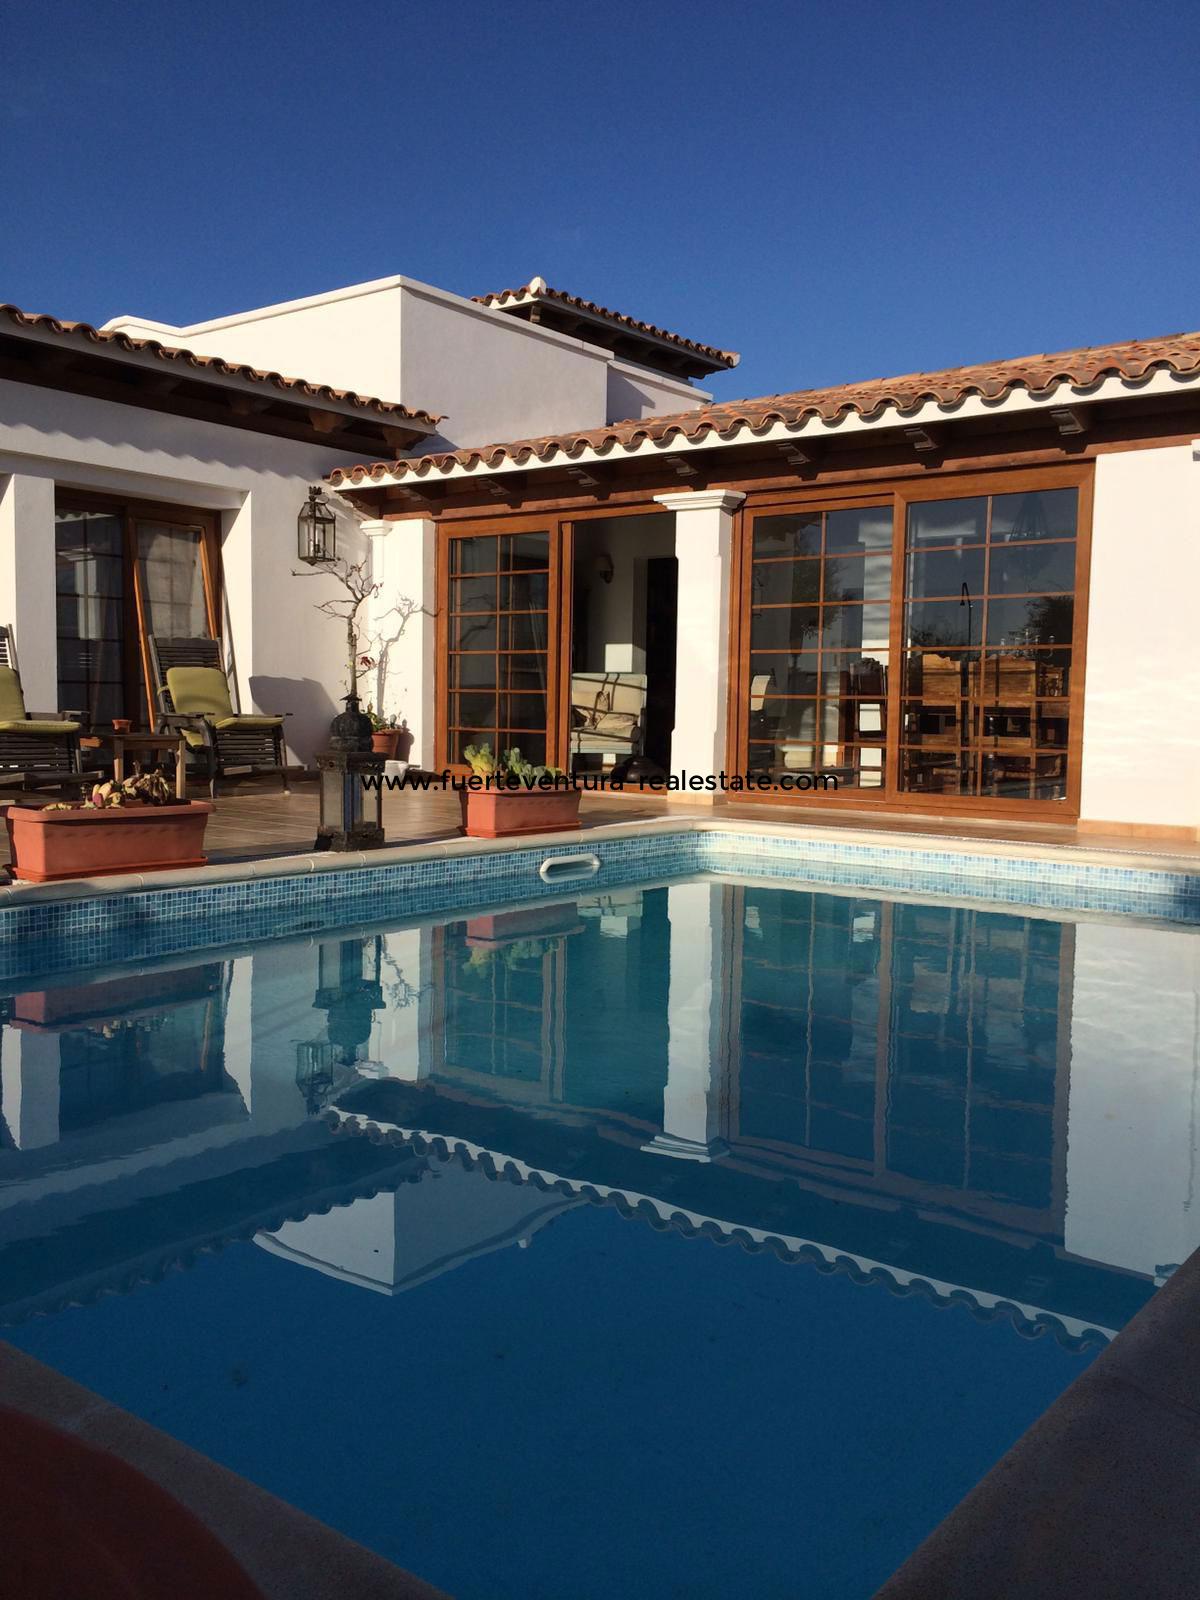 Very nice villa with pool and guest apartment in Corralejo